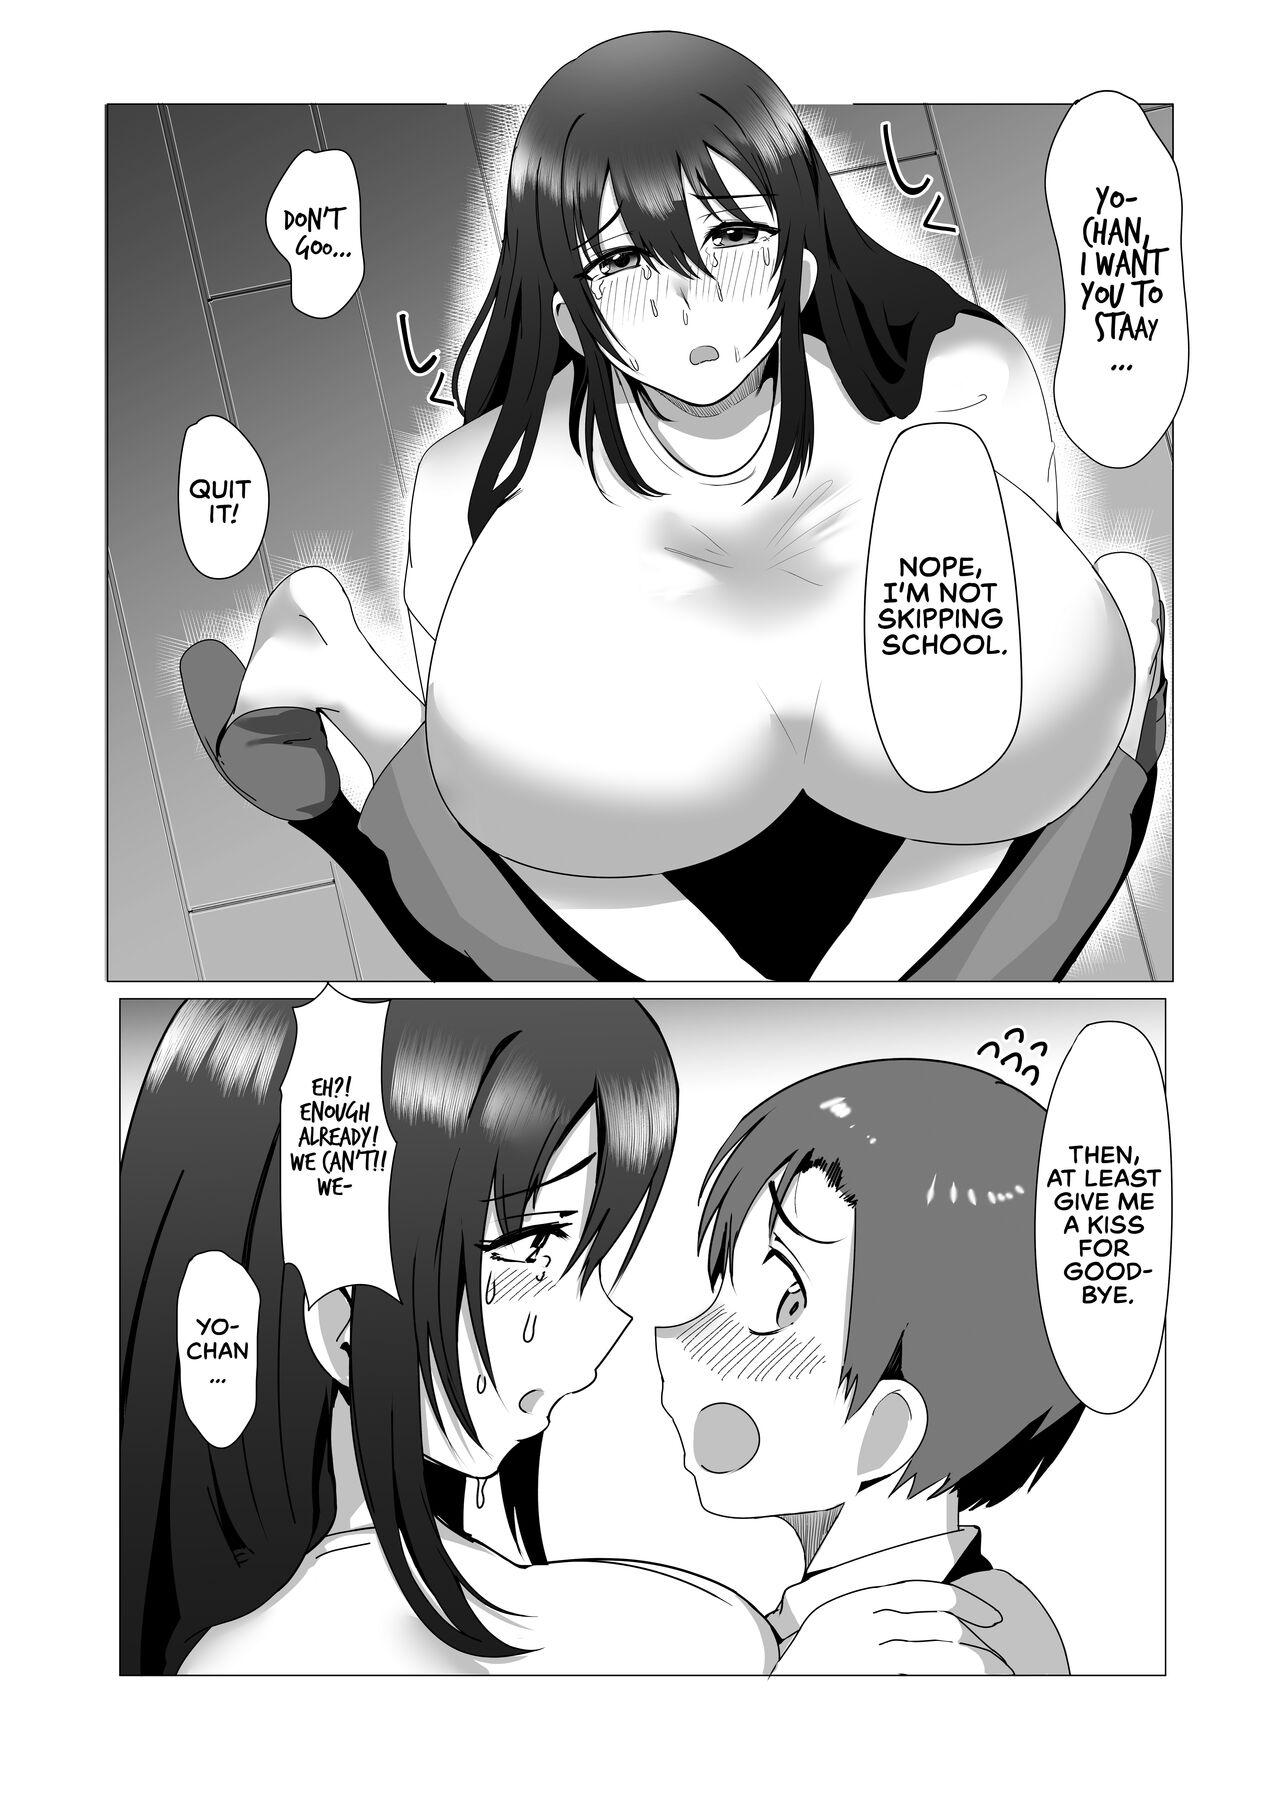 Argentina Hontou ni Mama de Yoi no | Are You Okay With Mommy? - Original Office Fuck - Page 4